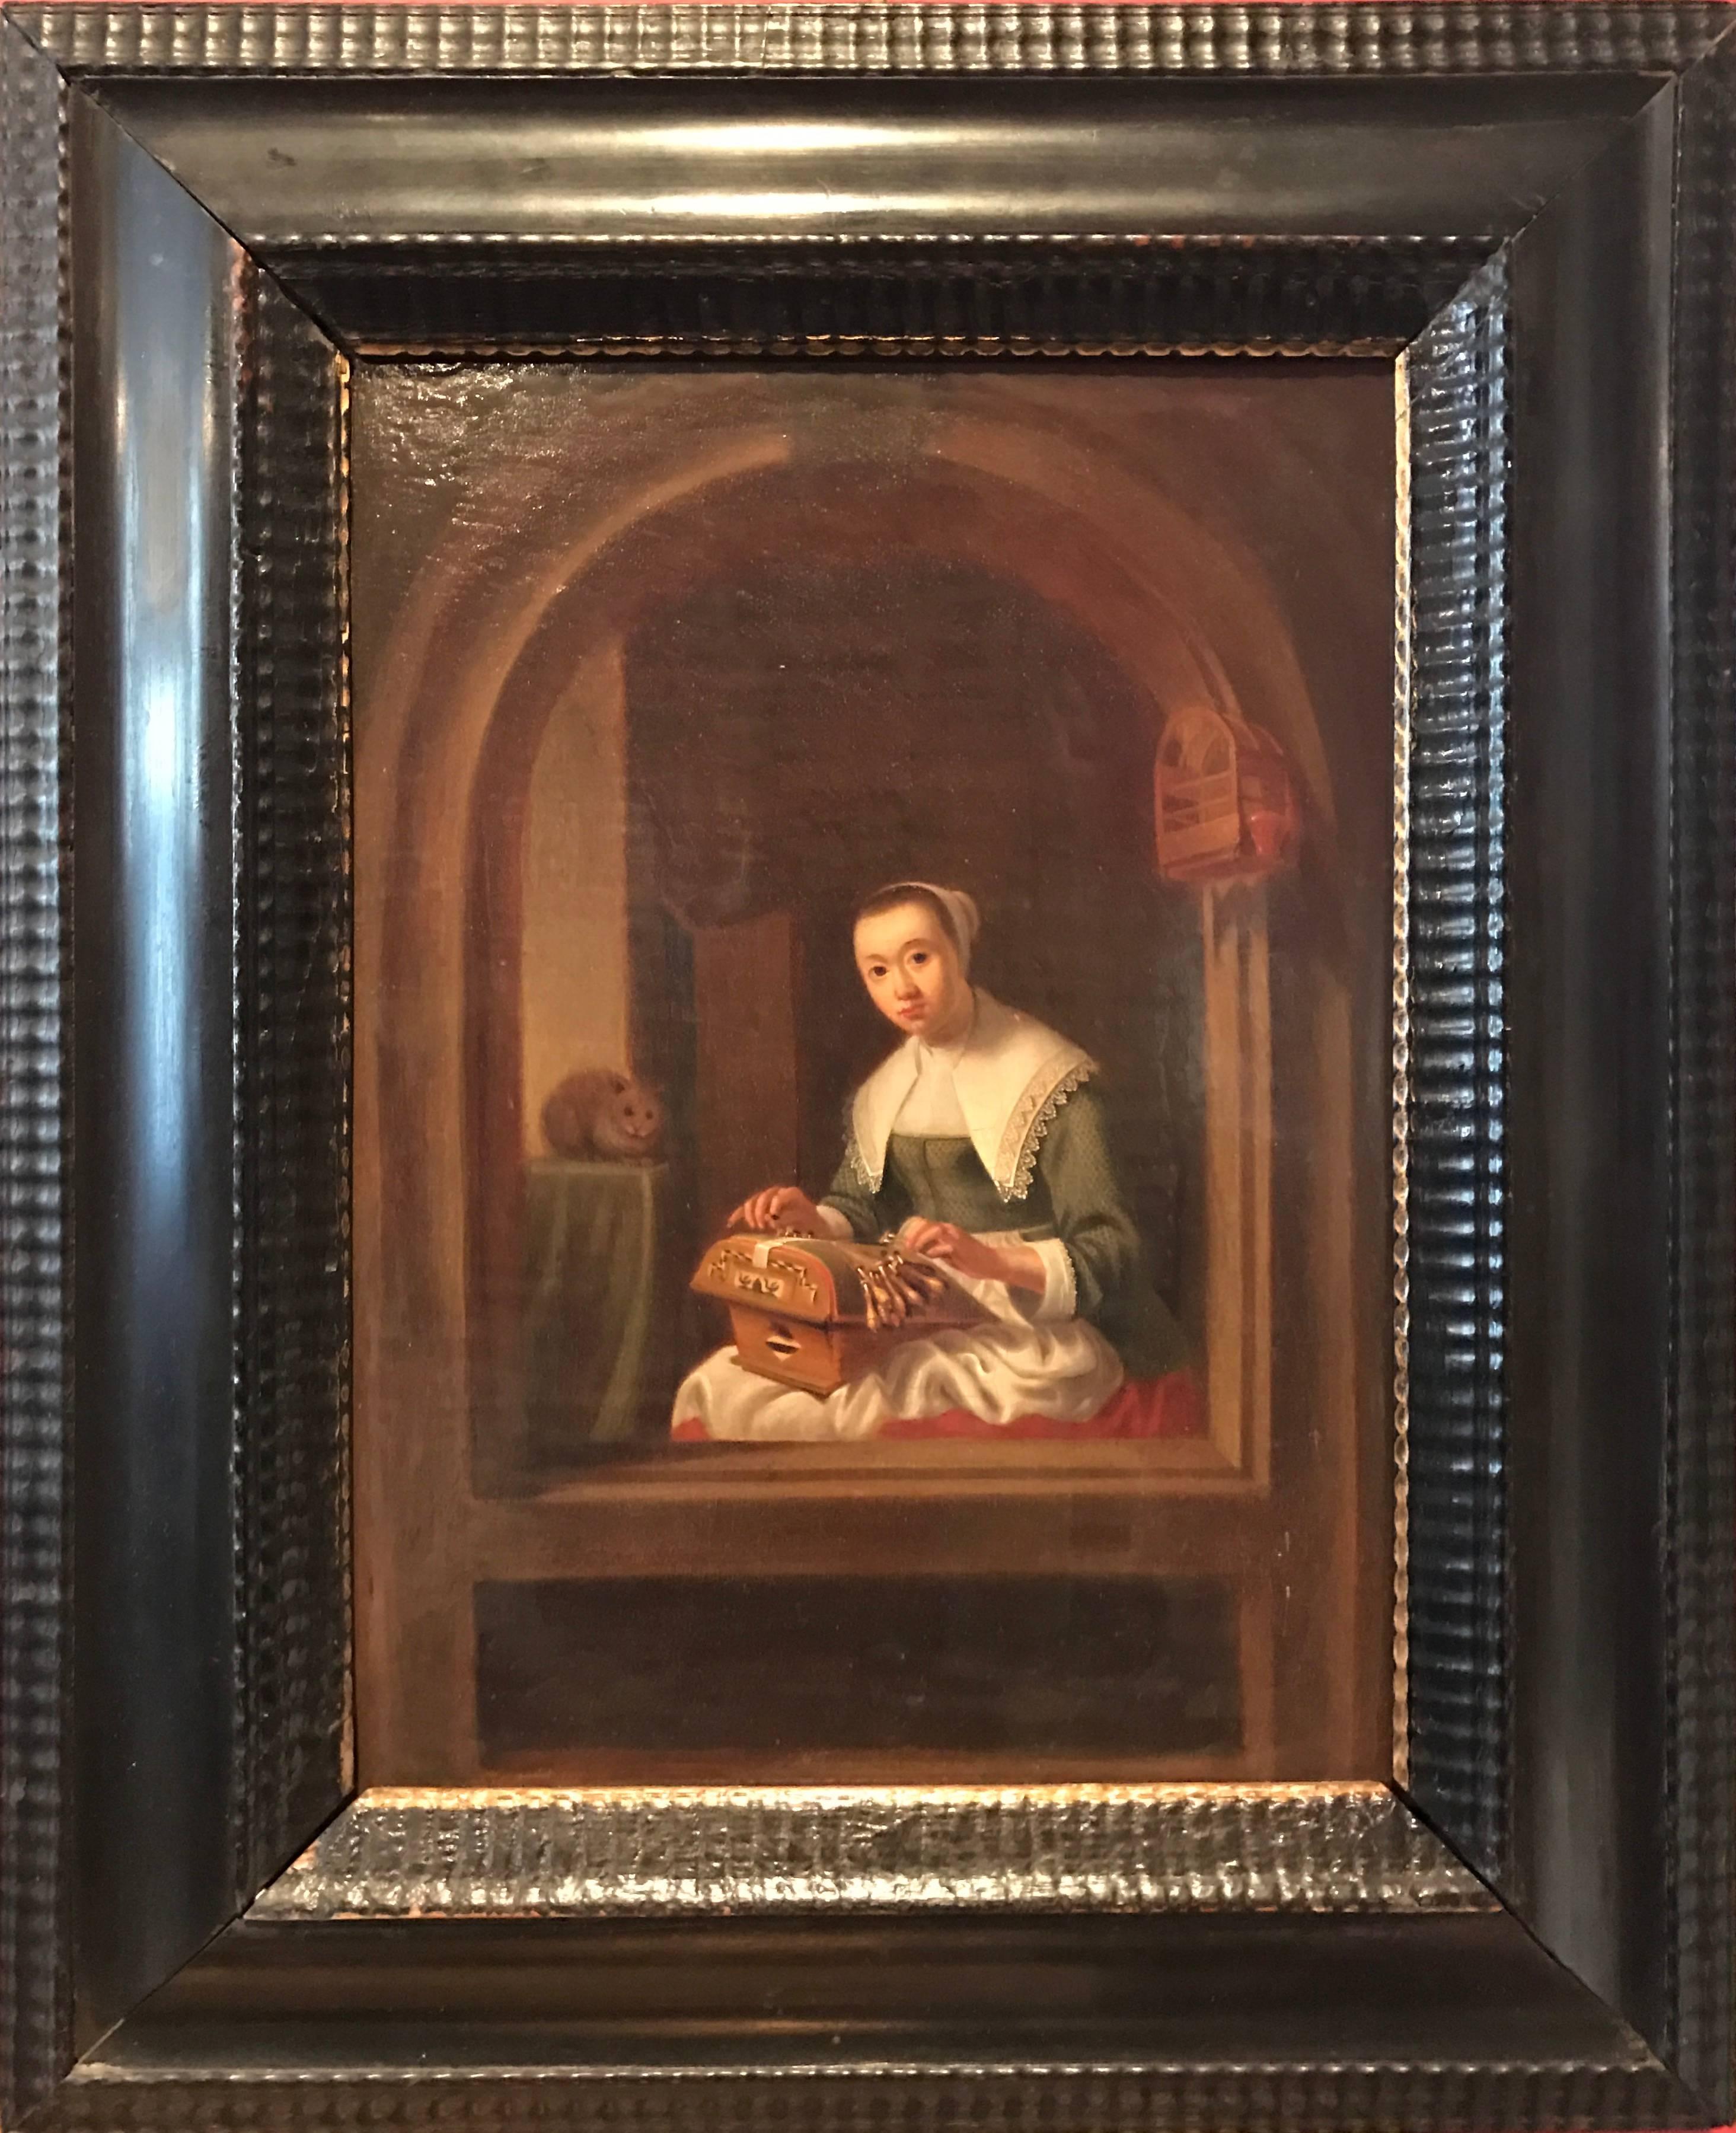 Unknown Portrait Painting - Fine 1700's Dutch Old Master Oil Painting Lady Sewing in Arched Window with Cat